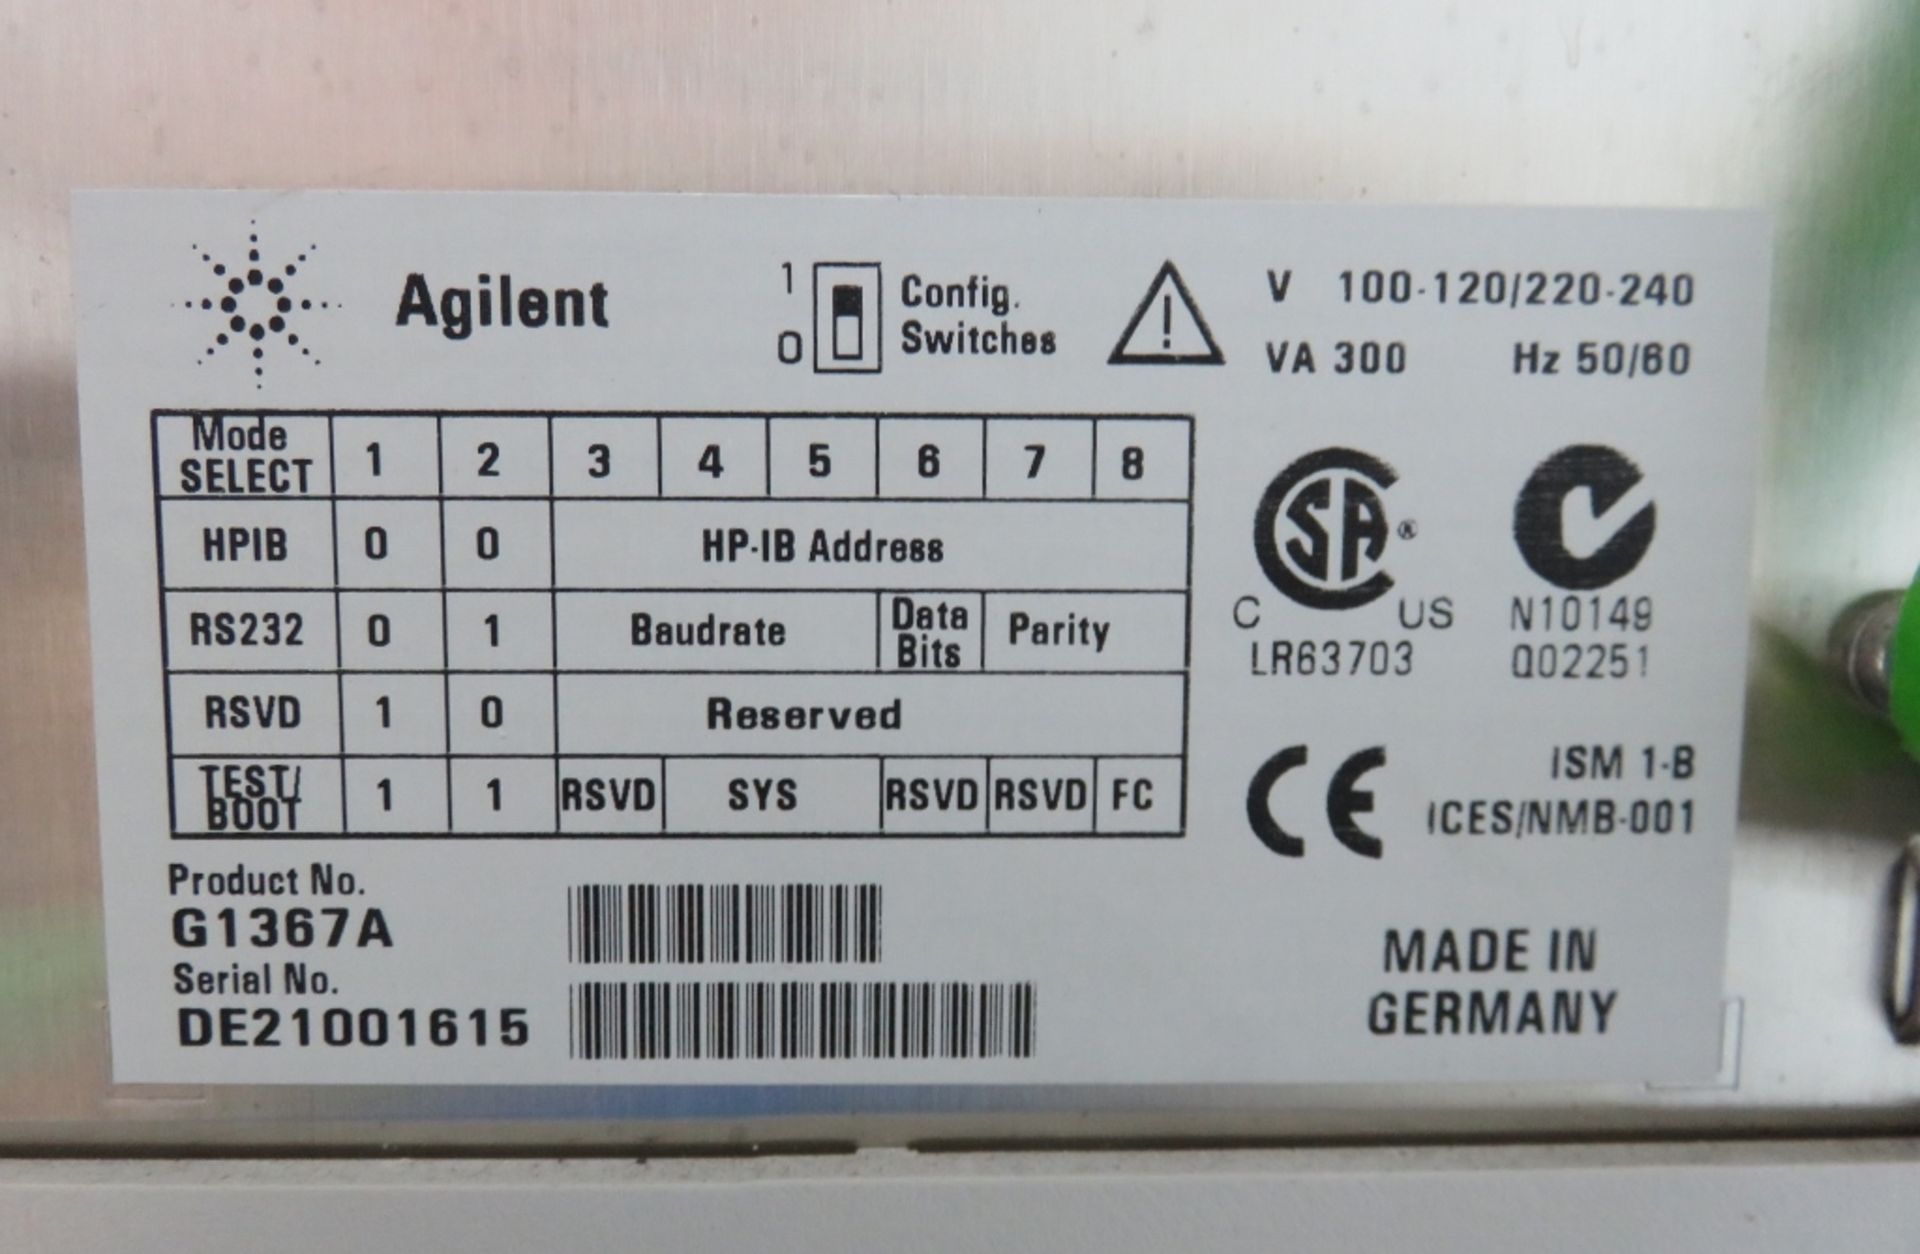 Agilent 1100 HPLC System with DAD Detector - Image 9 of 16